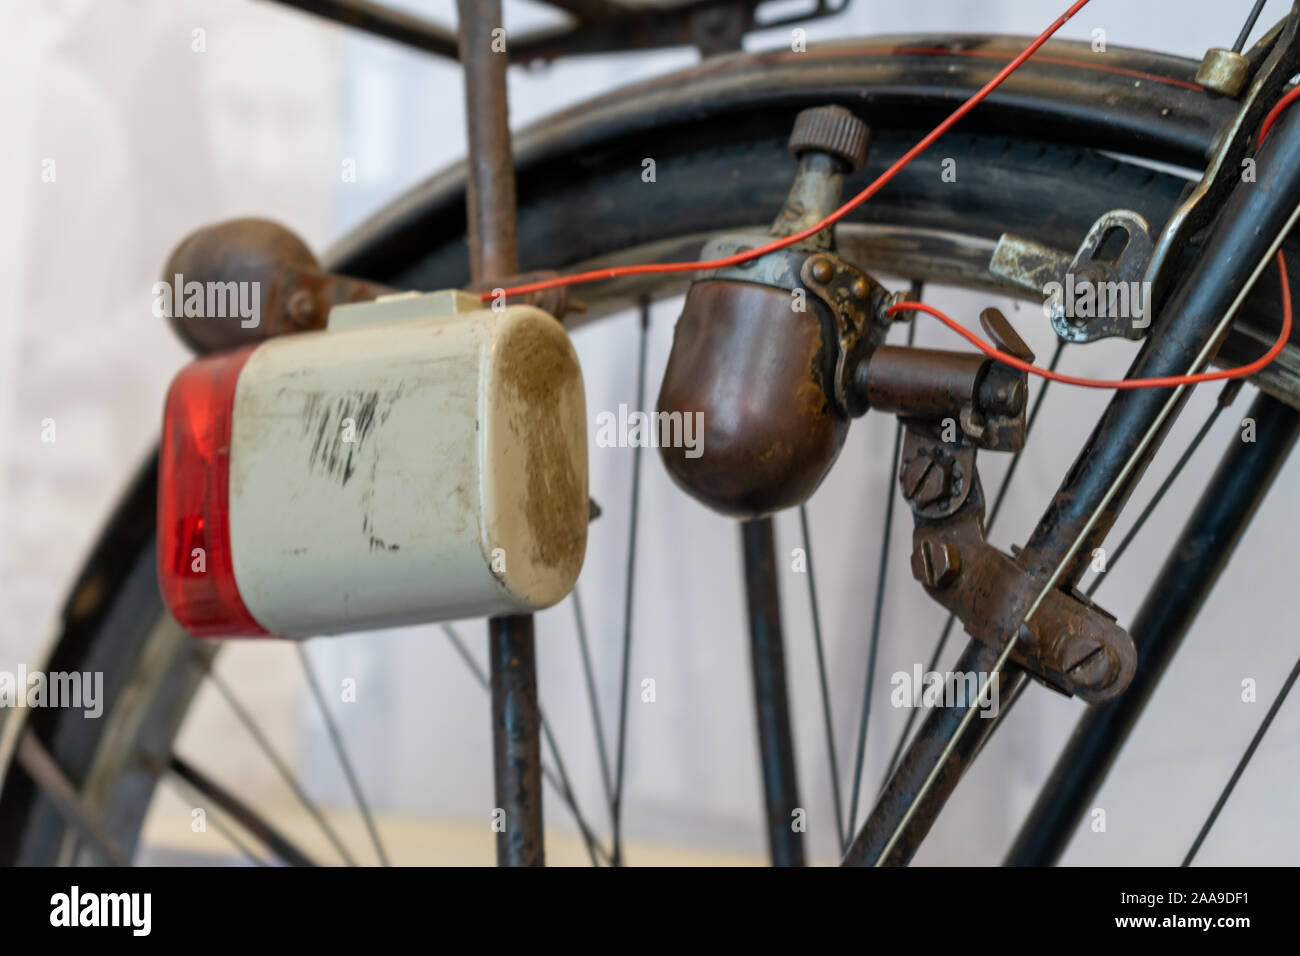 An old bike or bicycle dynamo system used to generate power to illuminate a lights Stock Photo